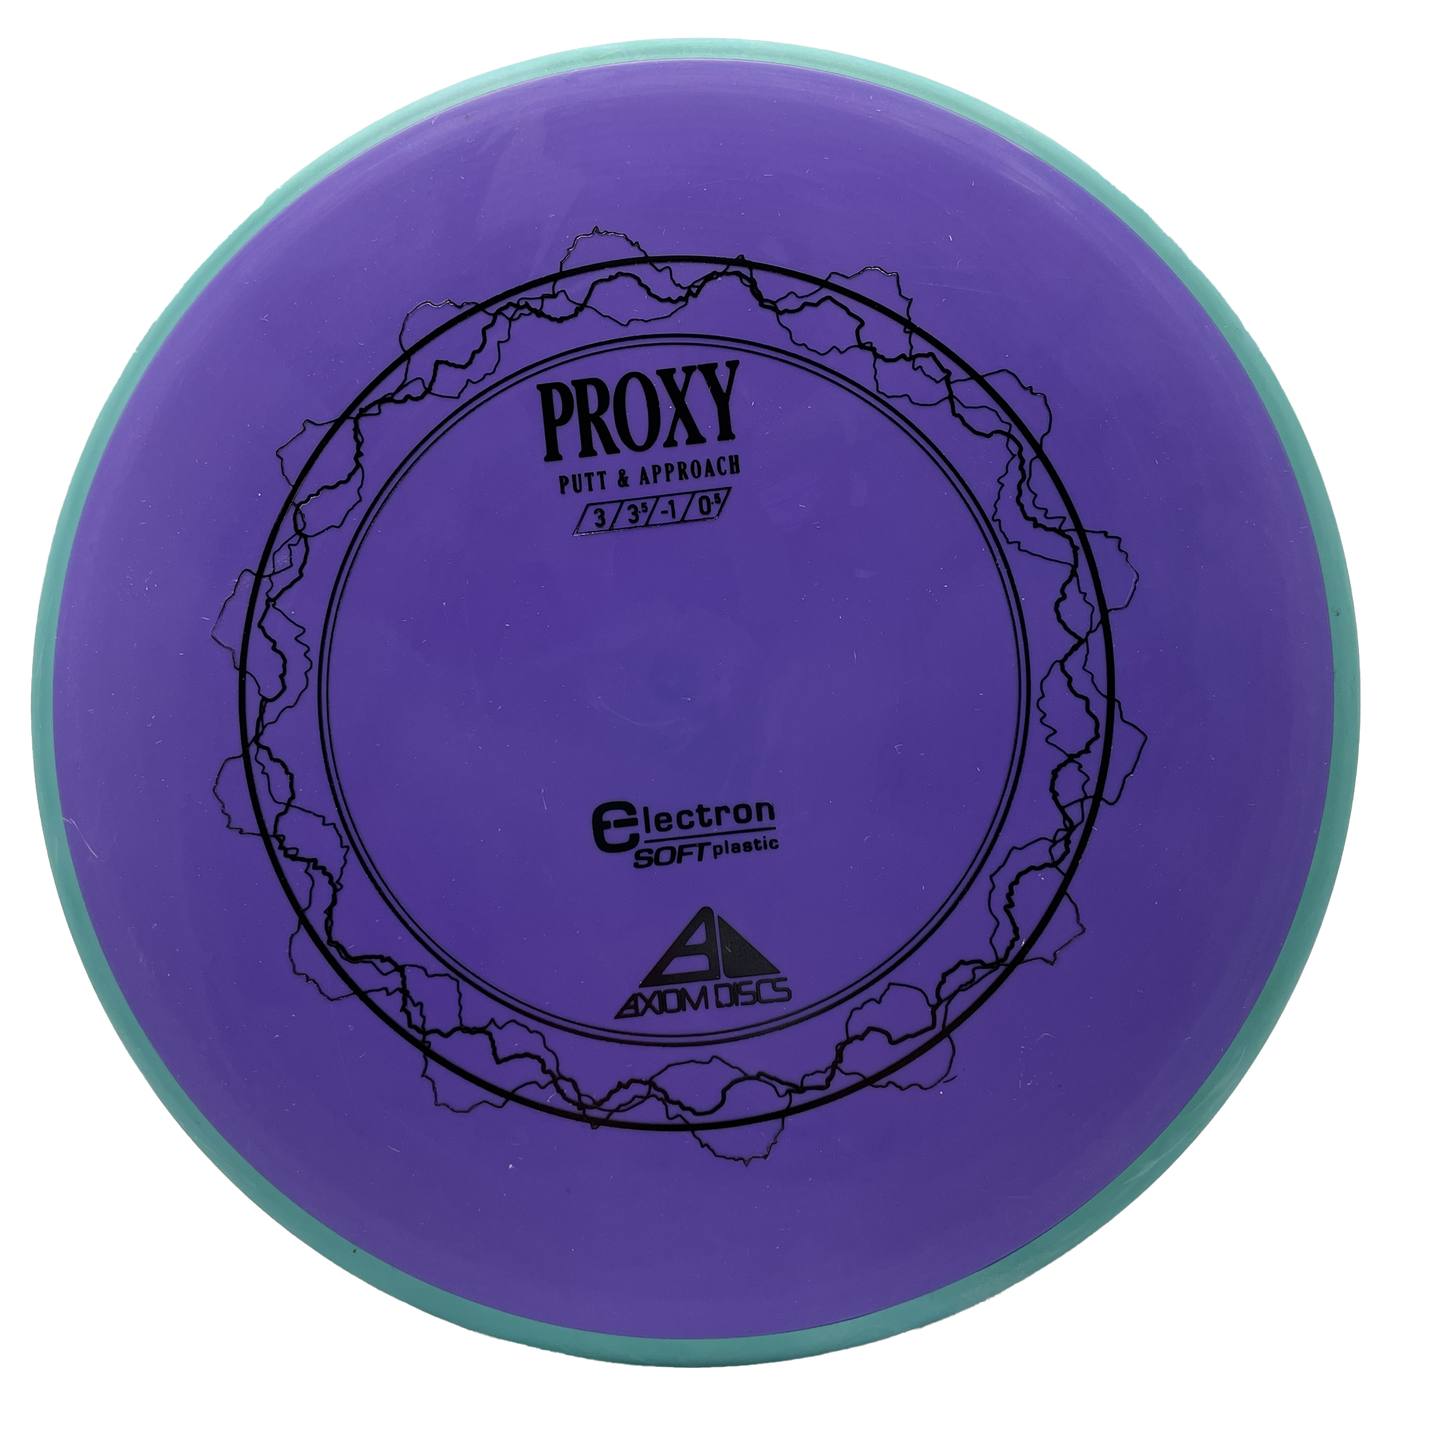 Axiom Electron Proxy Soft - Putter